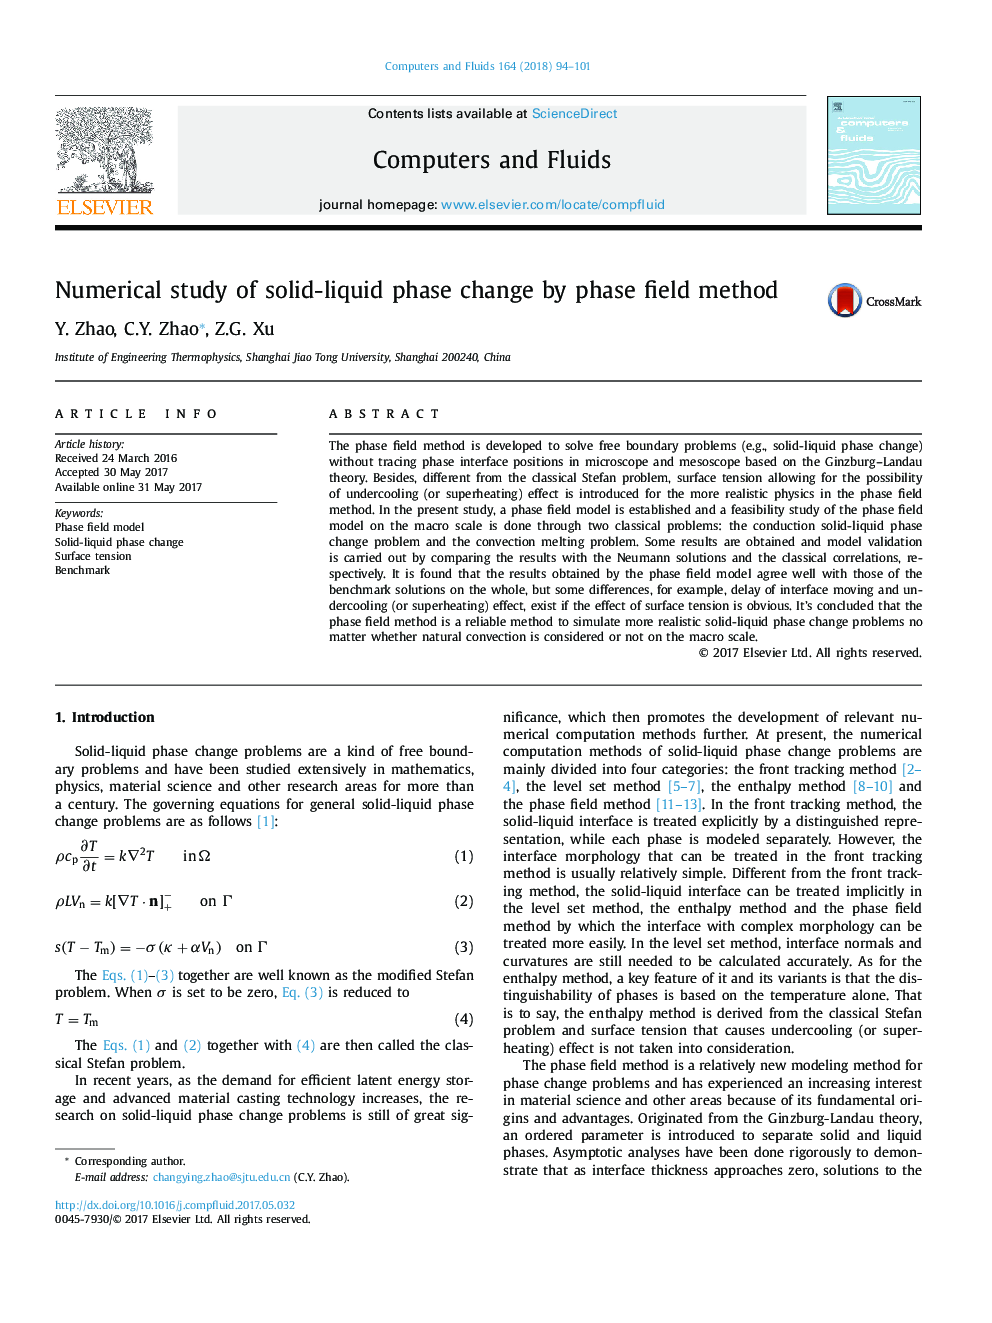 Numerical study of solid-liquid phase change by phase field method